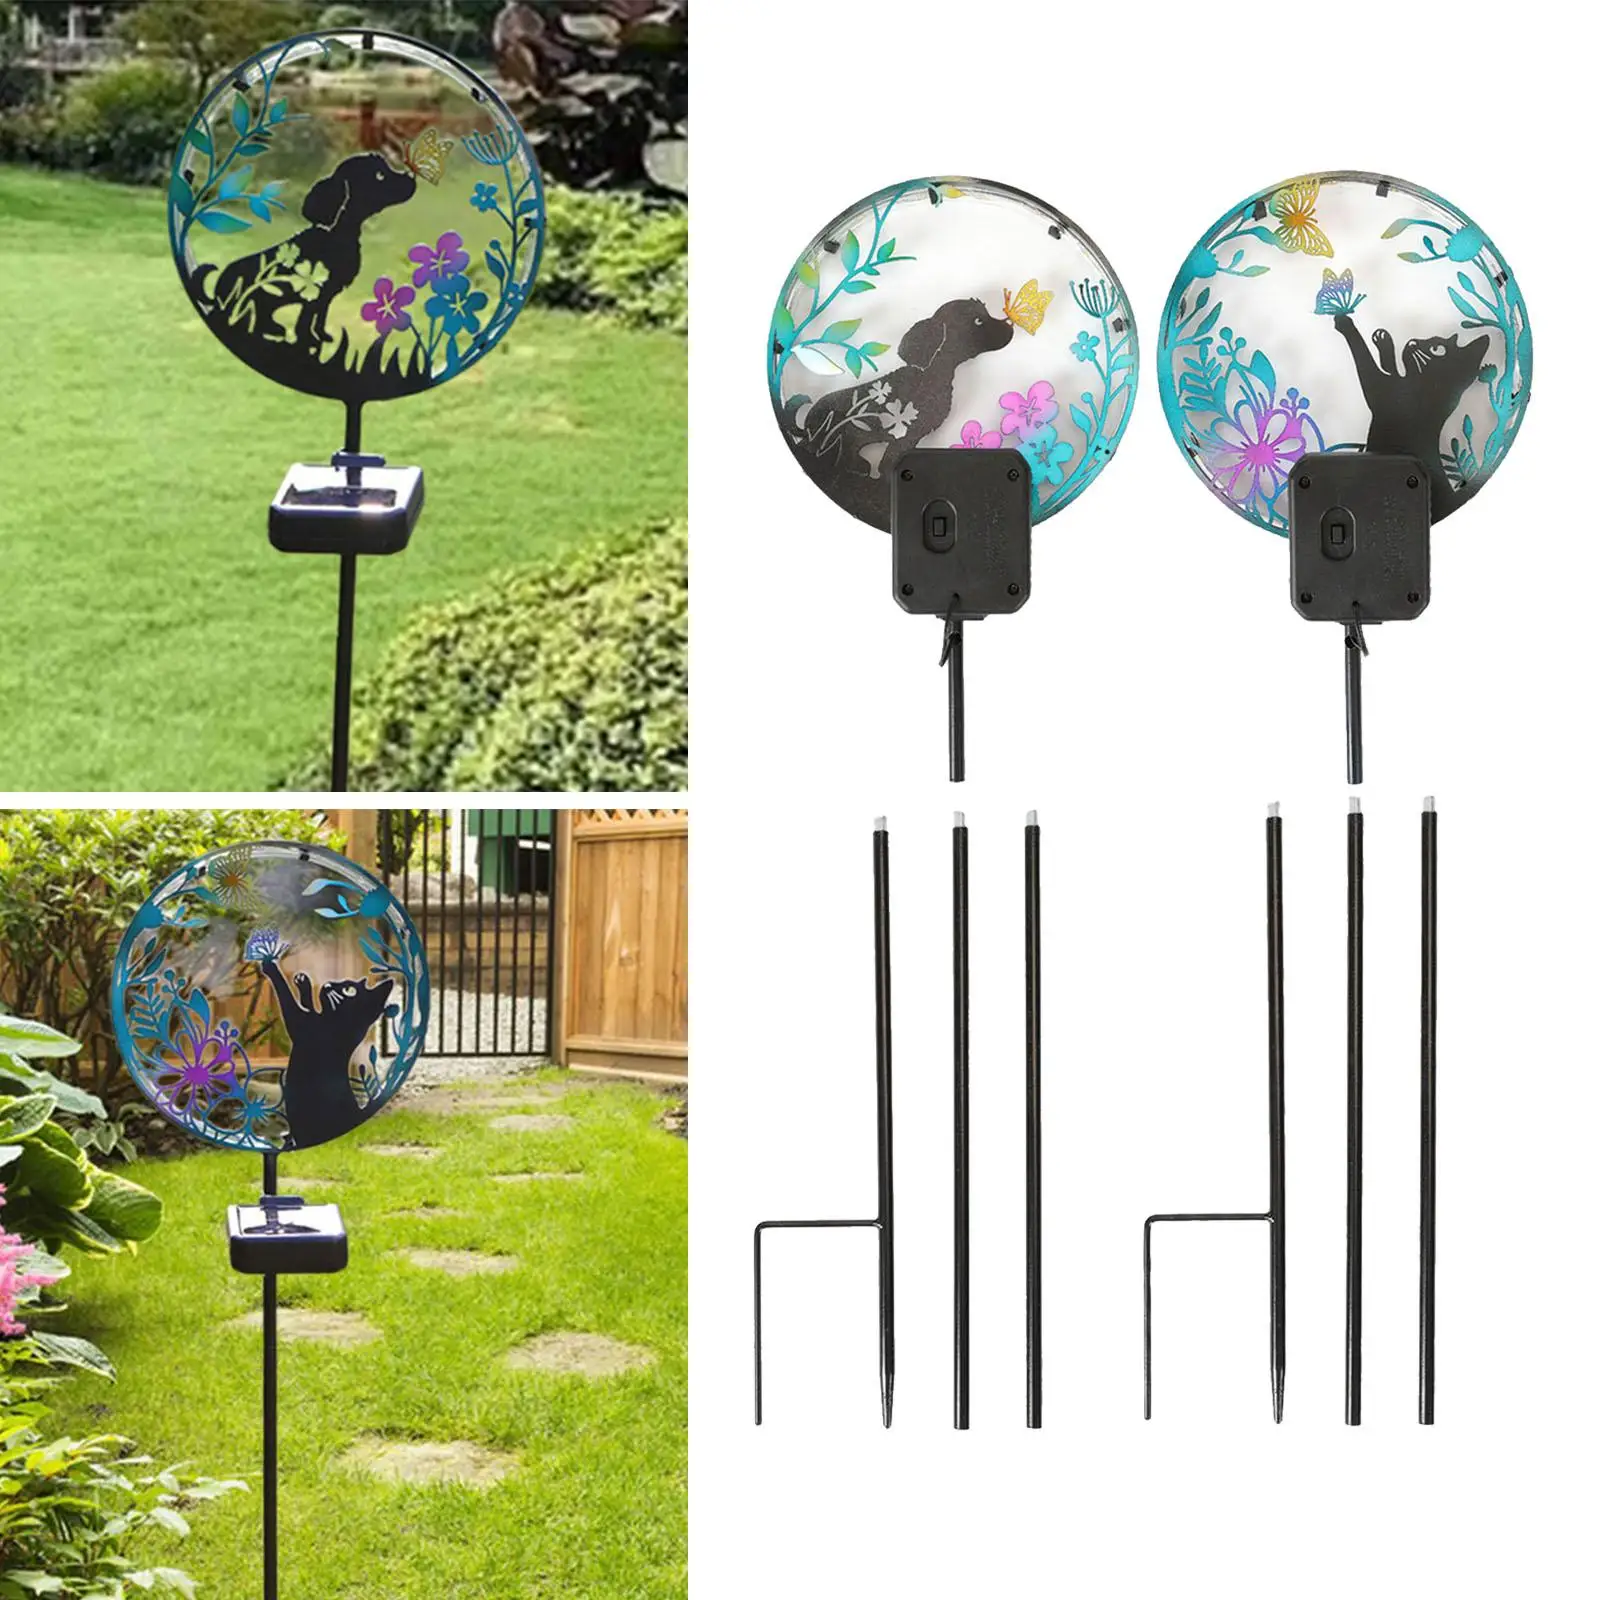 Garden Stake Light Decorative Iron Art Landscape Lamp for Patio Pathway Lawn